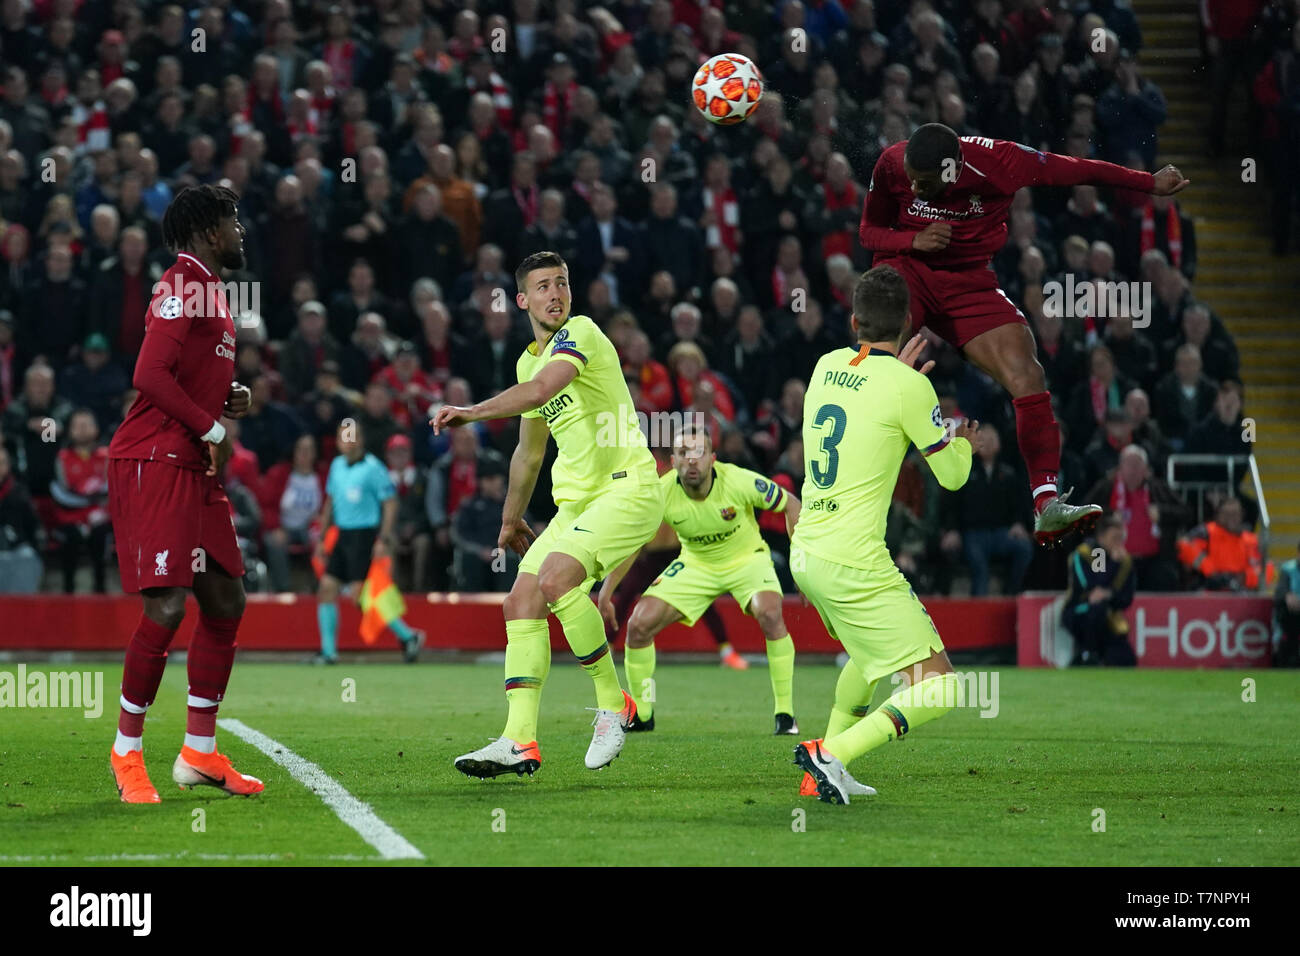 Liverpool's Georginio Wijnaldum scores his sides third goal 7th Mayl 2019 ,  Anfield Stadium, Liverpool, England; UEFA Champions League Semi Final,  Second Leg, Liverpool FC vs FC Barcelona Credit: Terry Donnelly/News Images